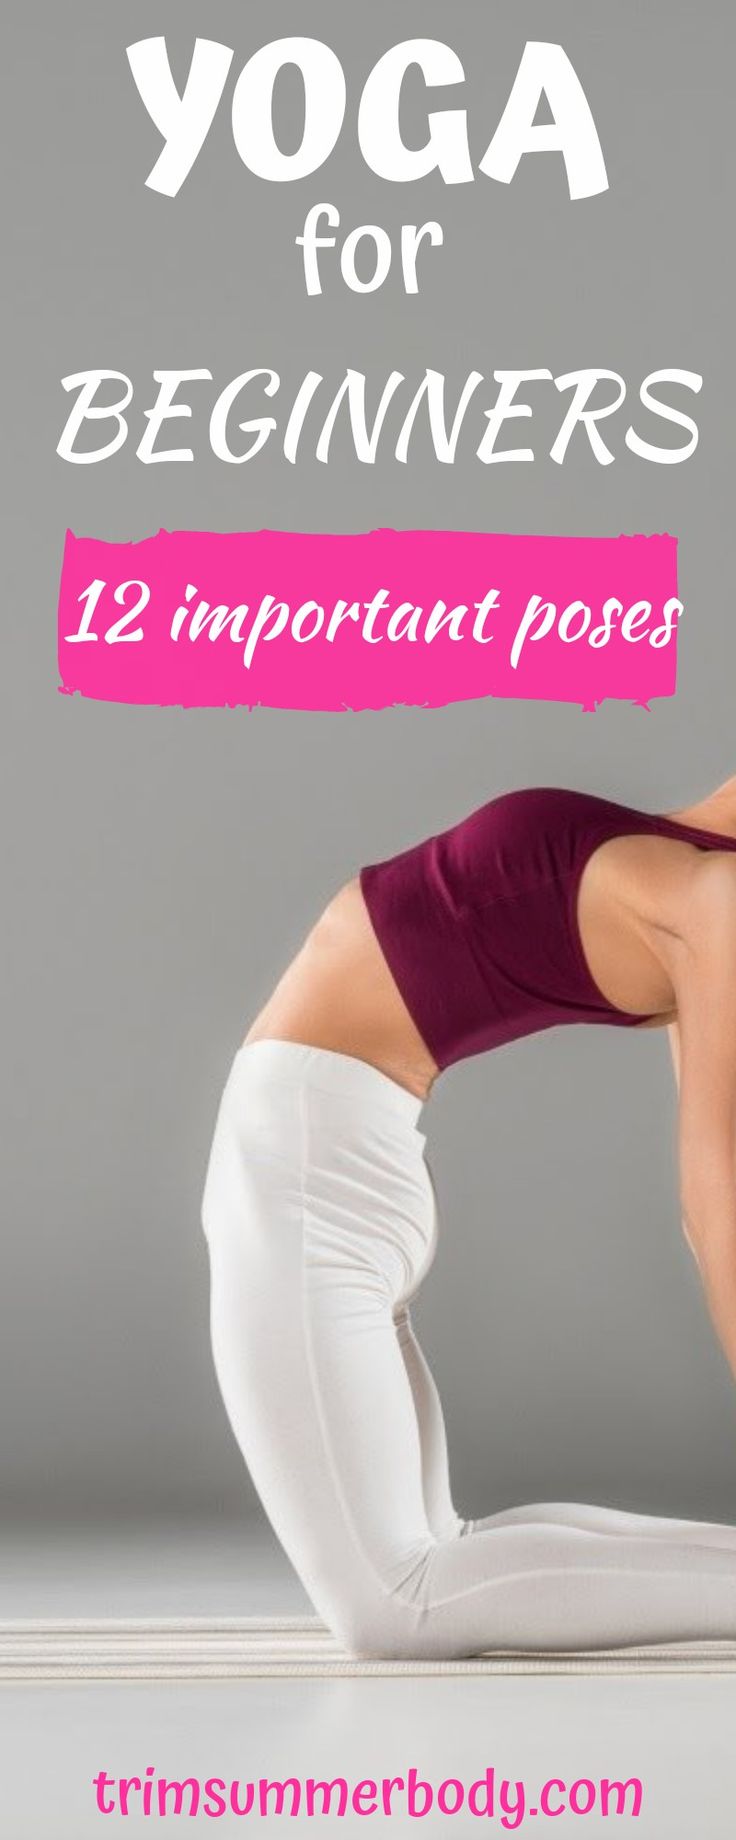 Yoga for beginners - 12 important poses.